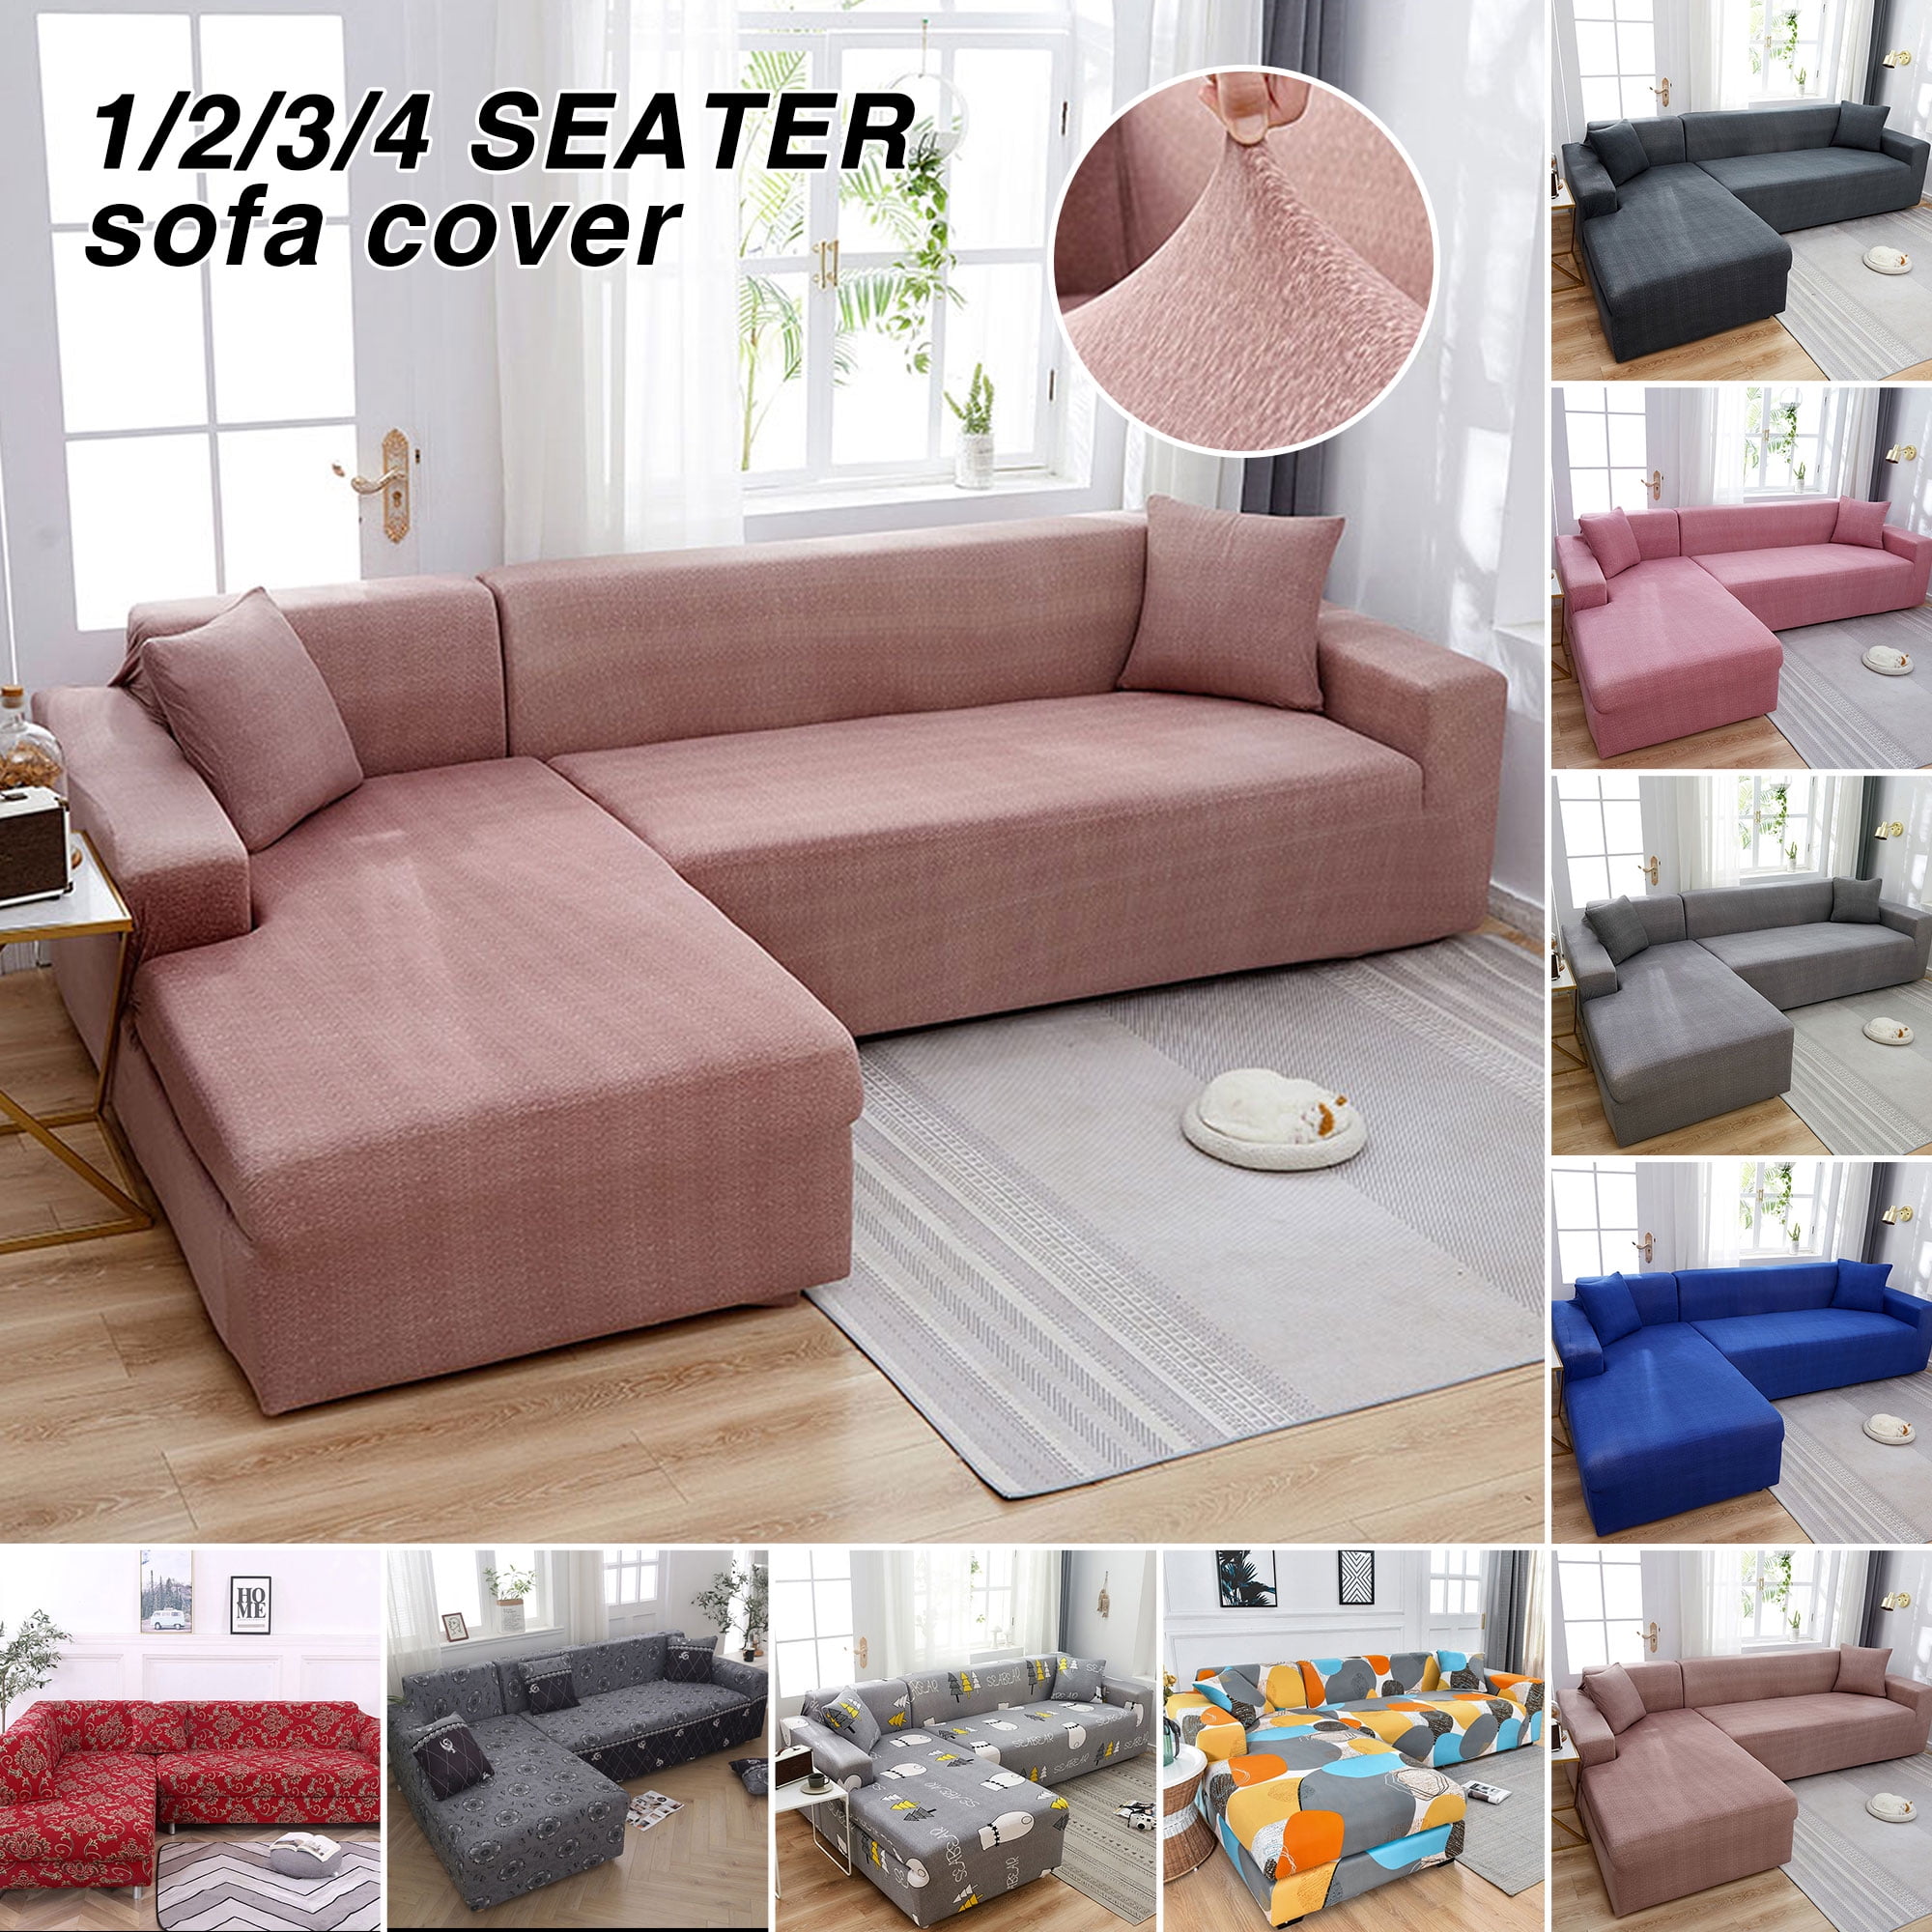 Details about   Sofa Cover Couch Covers 1/2/3/4 Seater Stretch Slipcovers Protector Sofa Decor 